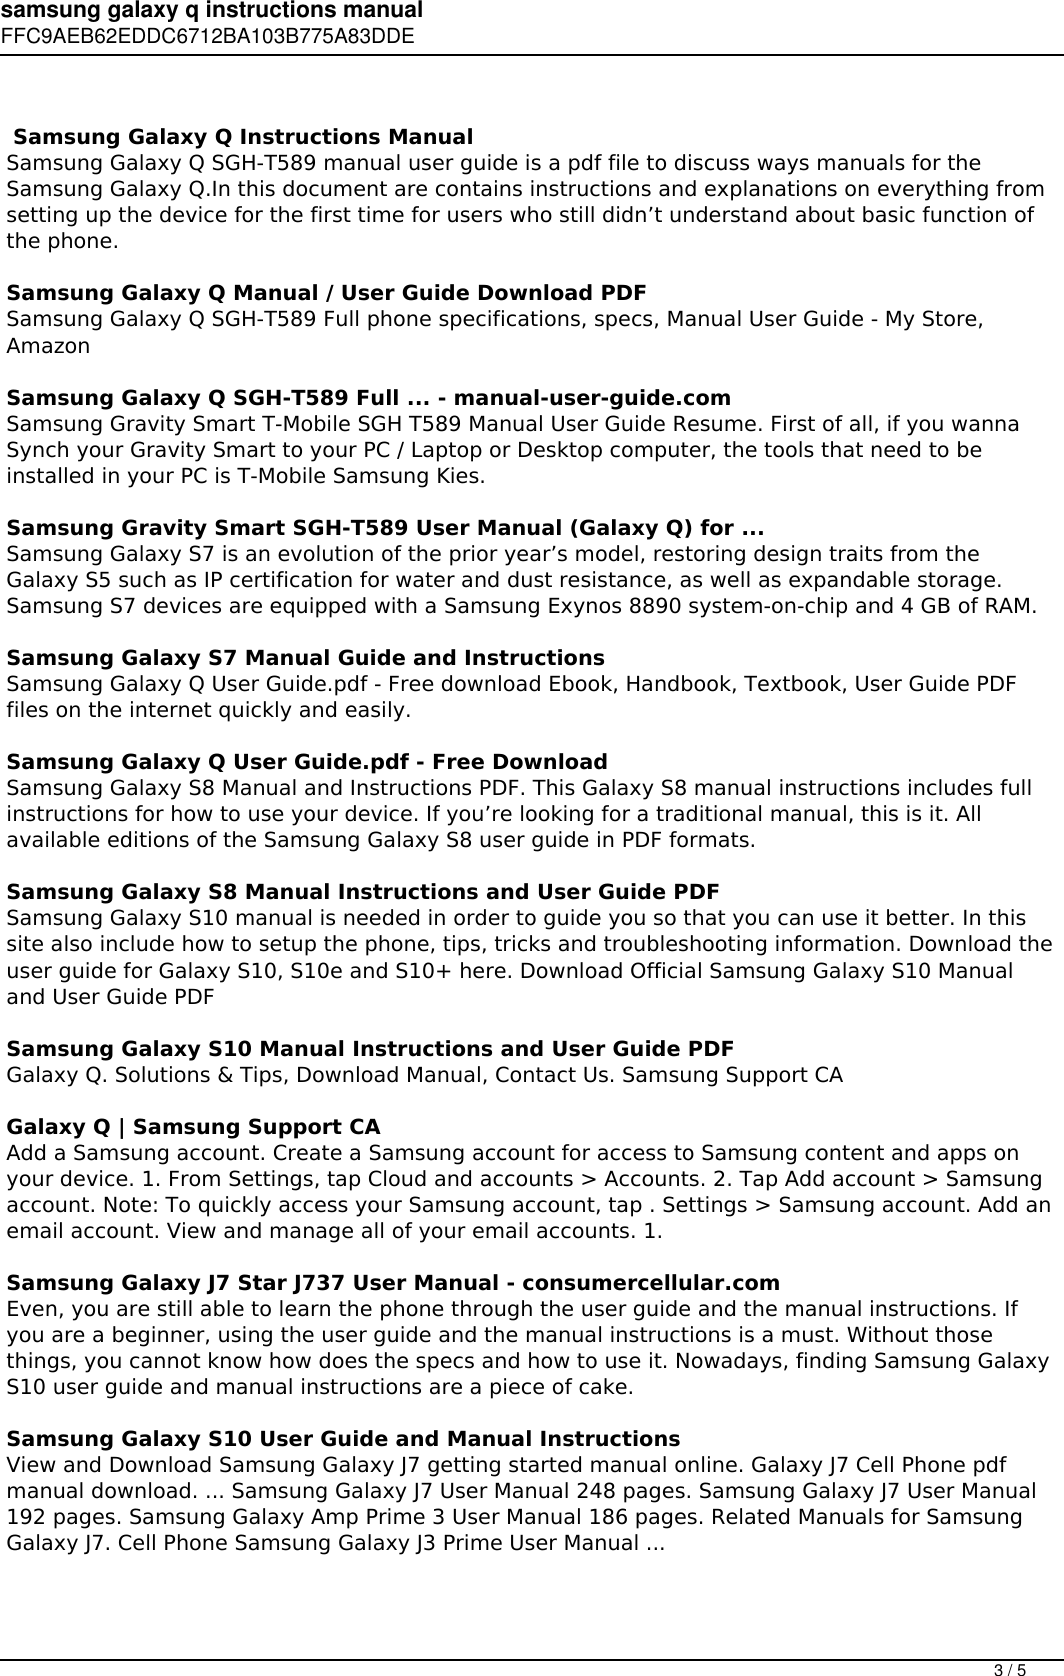 Page 3 of 5 - Samsung Galaxy Q Instructions Manual